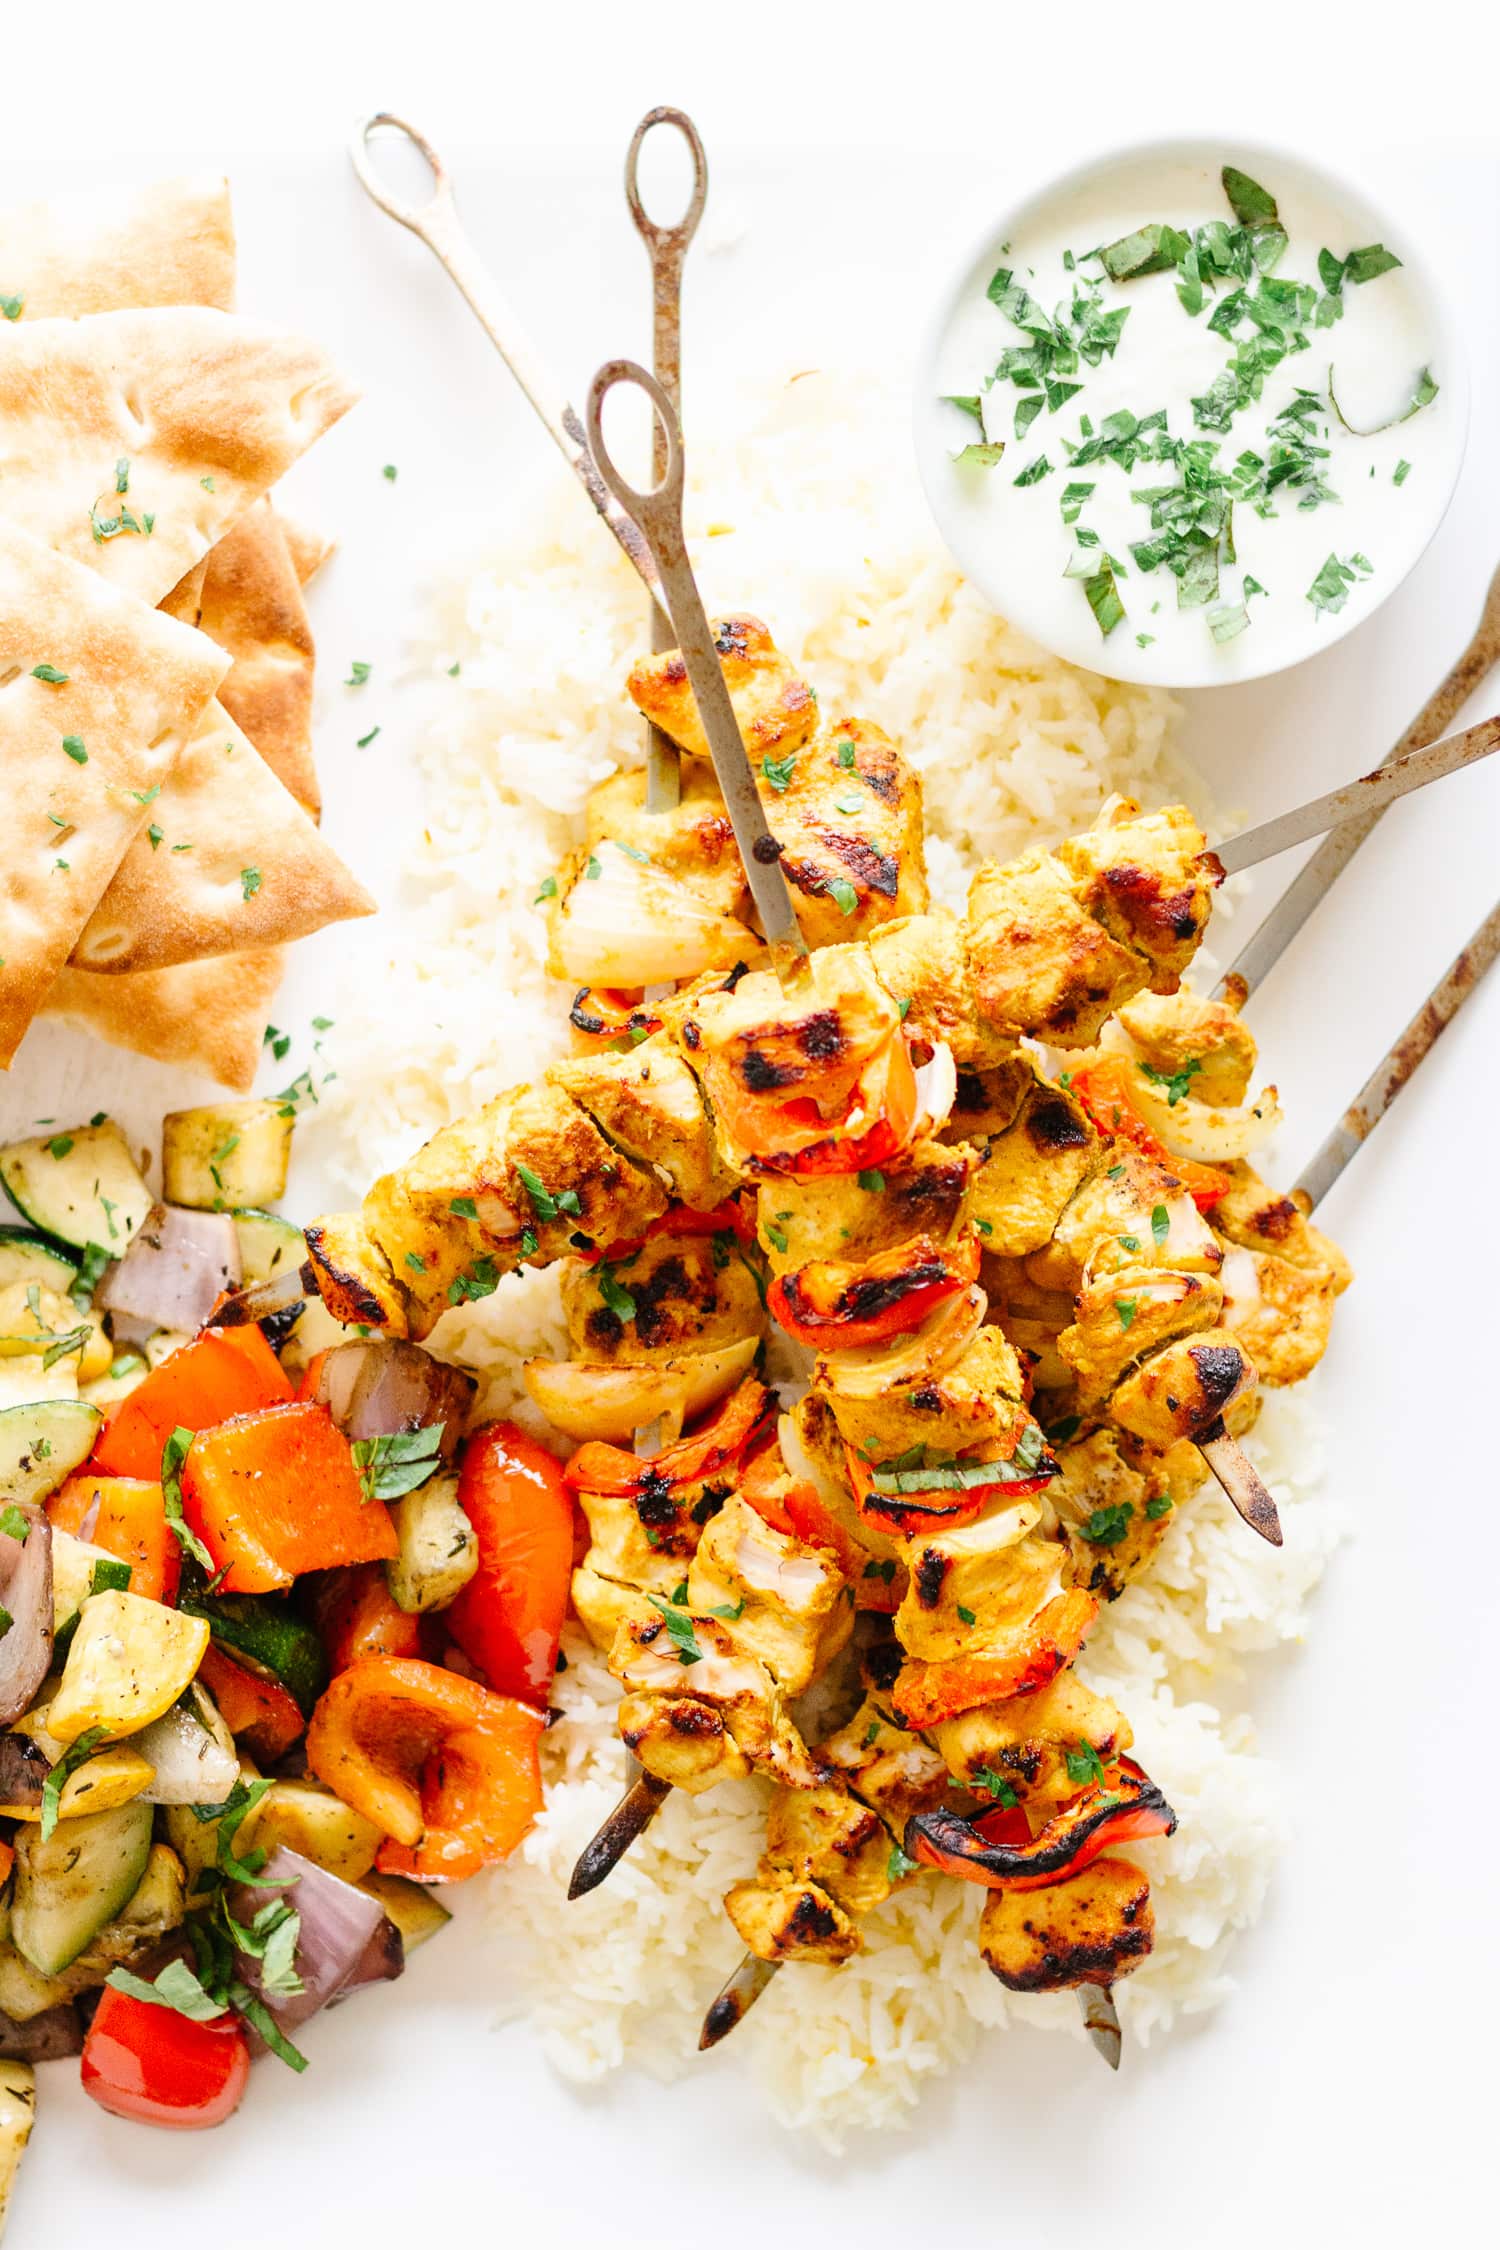 Grilled Tandoori Chicken Kebabs over a bed of rice with cucumber raita, naan bread and grilled veggies in the corners.